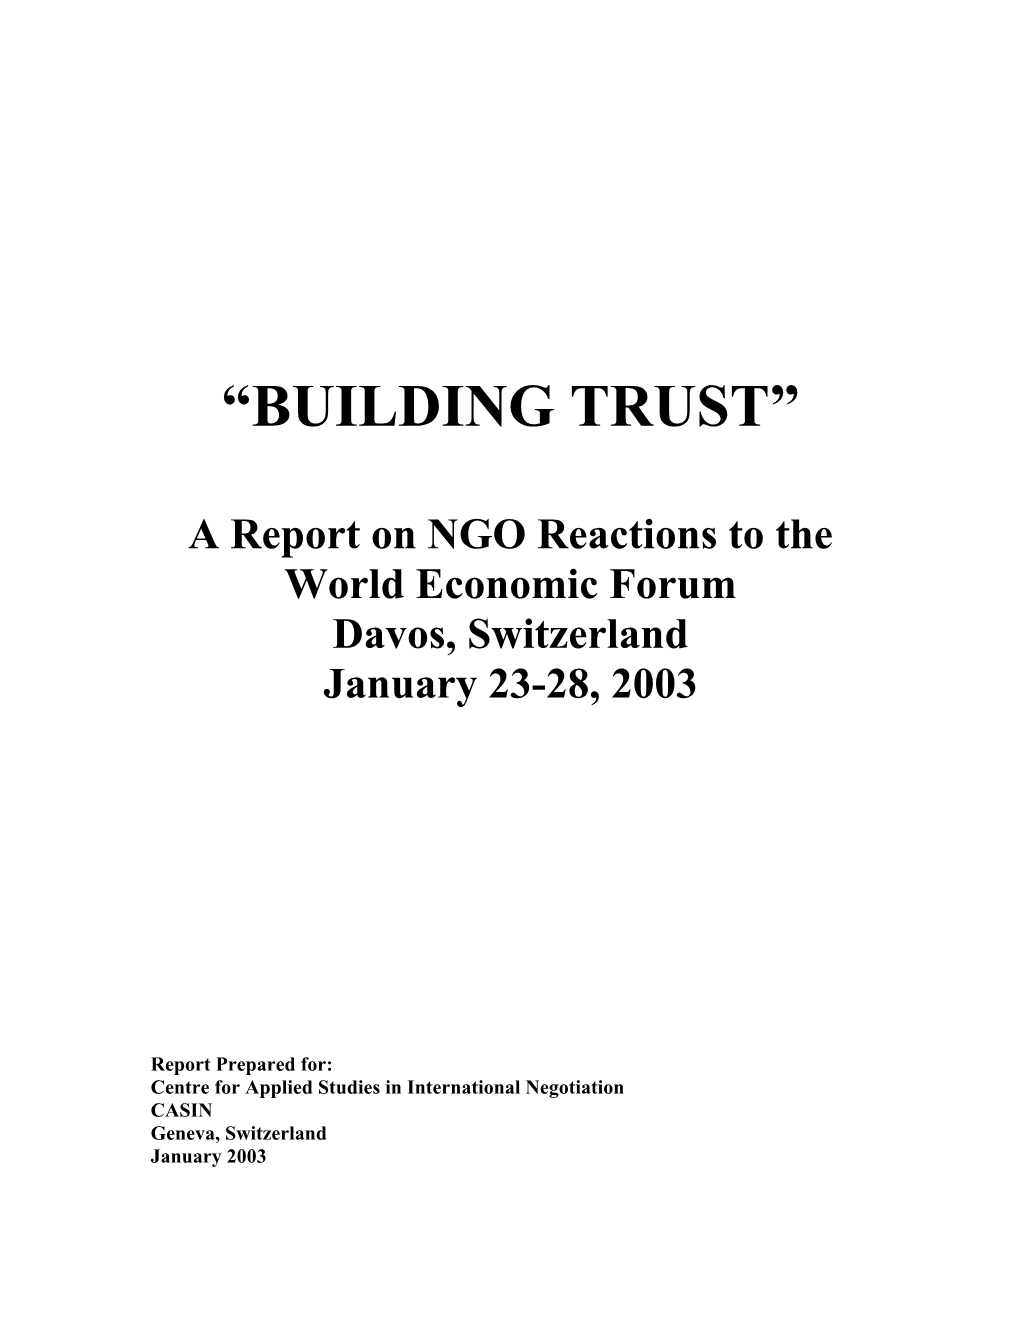 Building Trust: a Report on NGO Reactions to the World Econmic Forum Davos, Switzerland